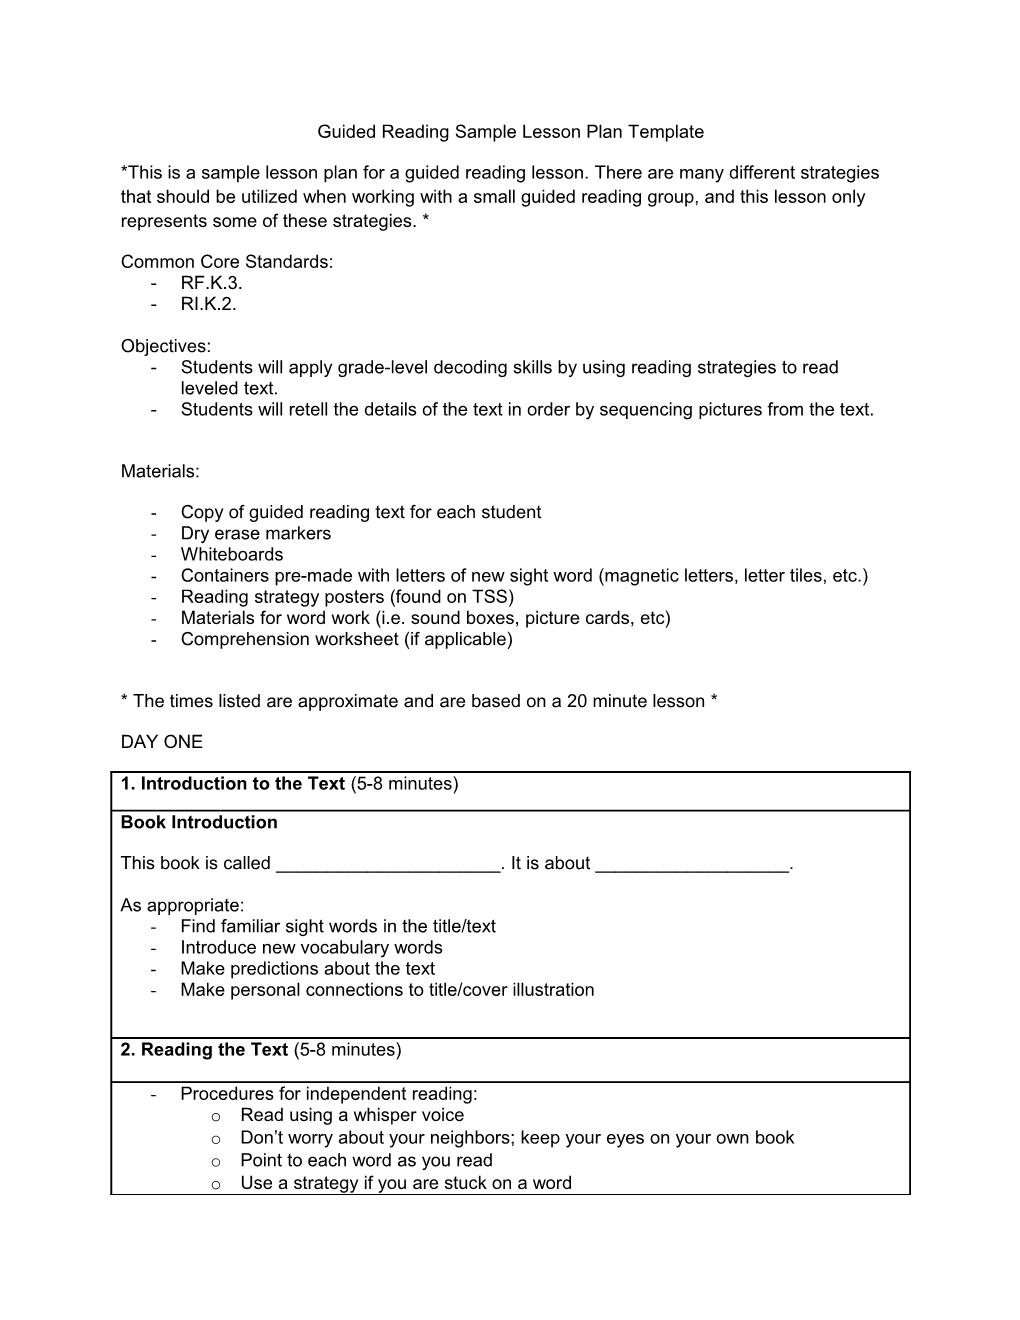 Guided Reading Sample Lesson Plan Template